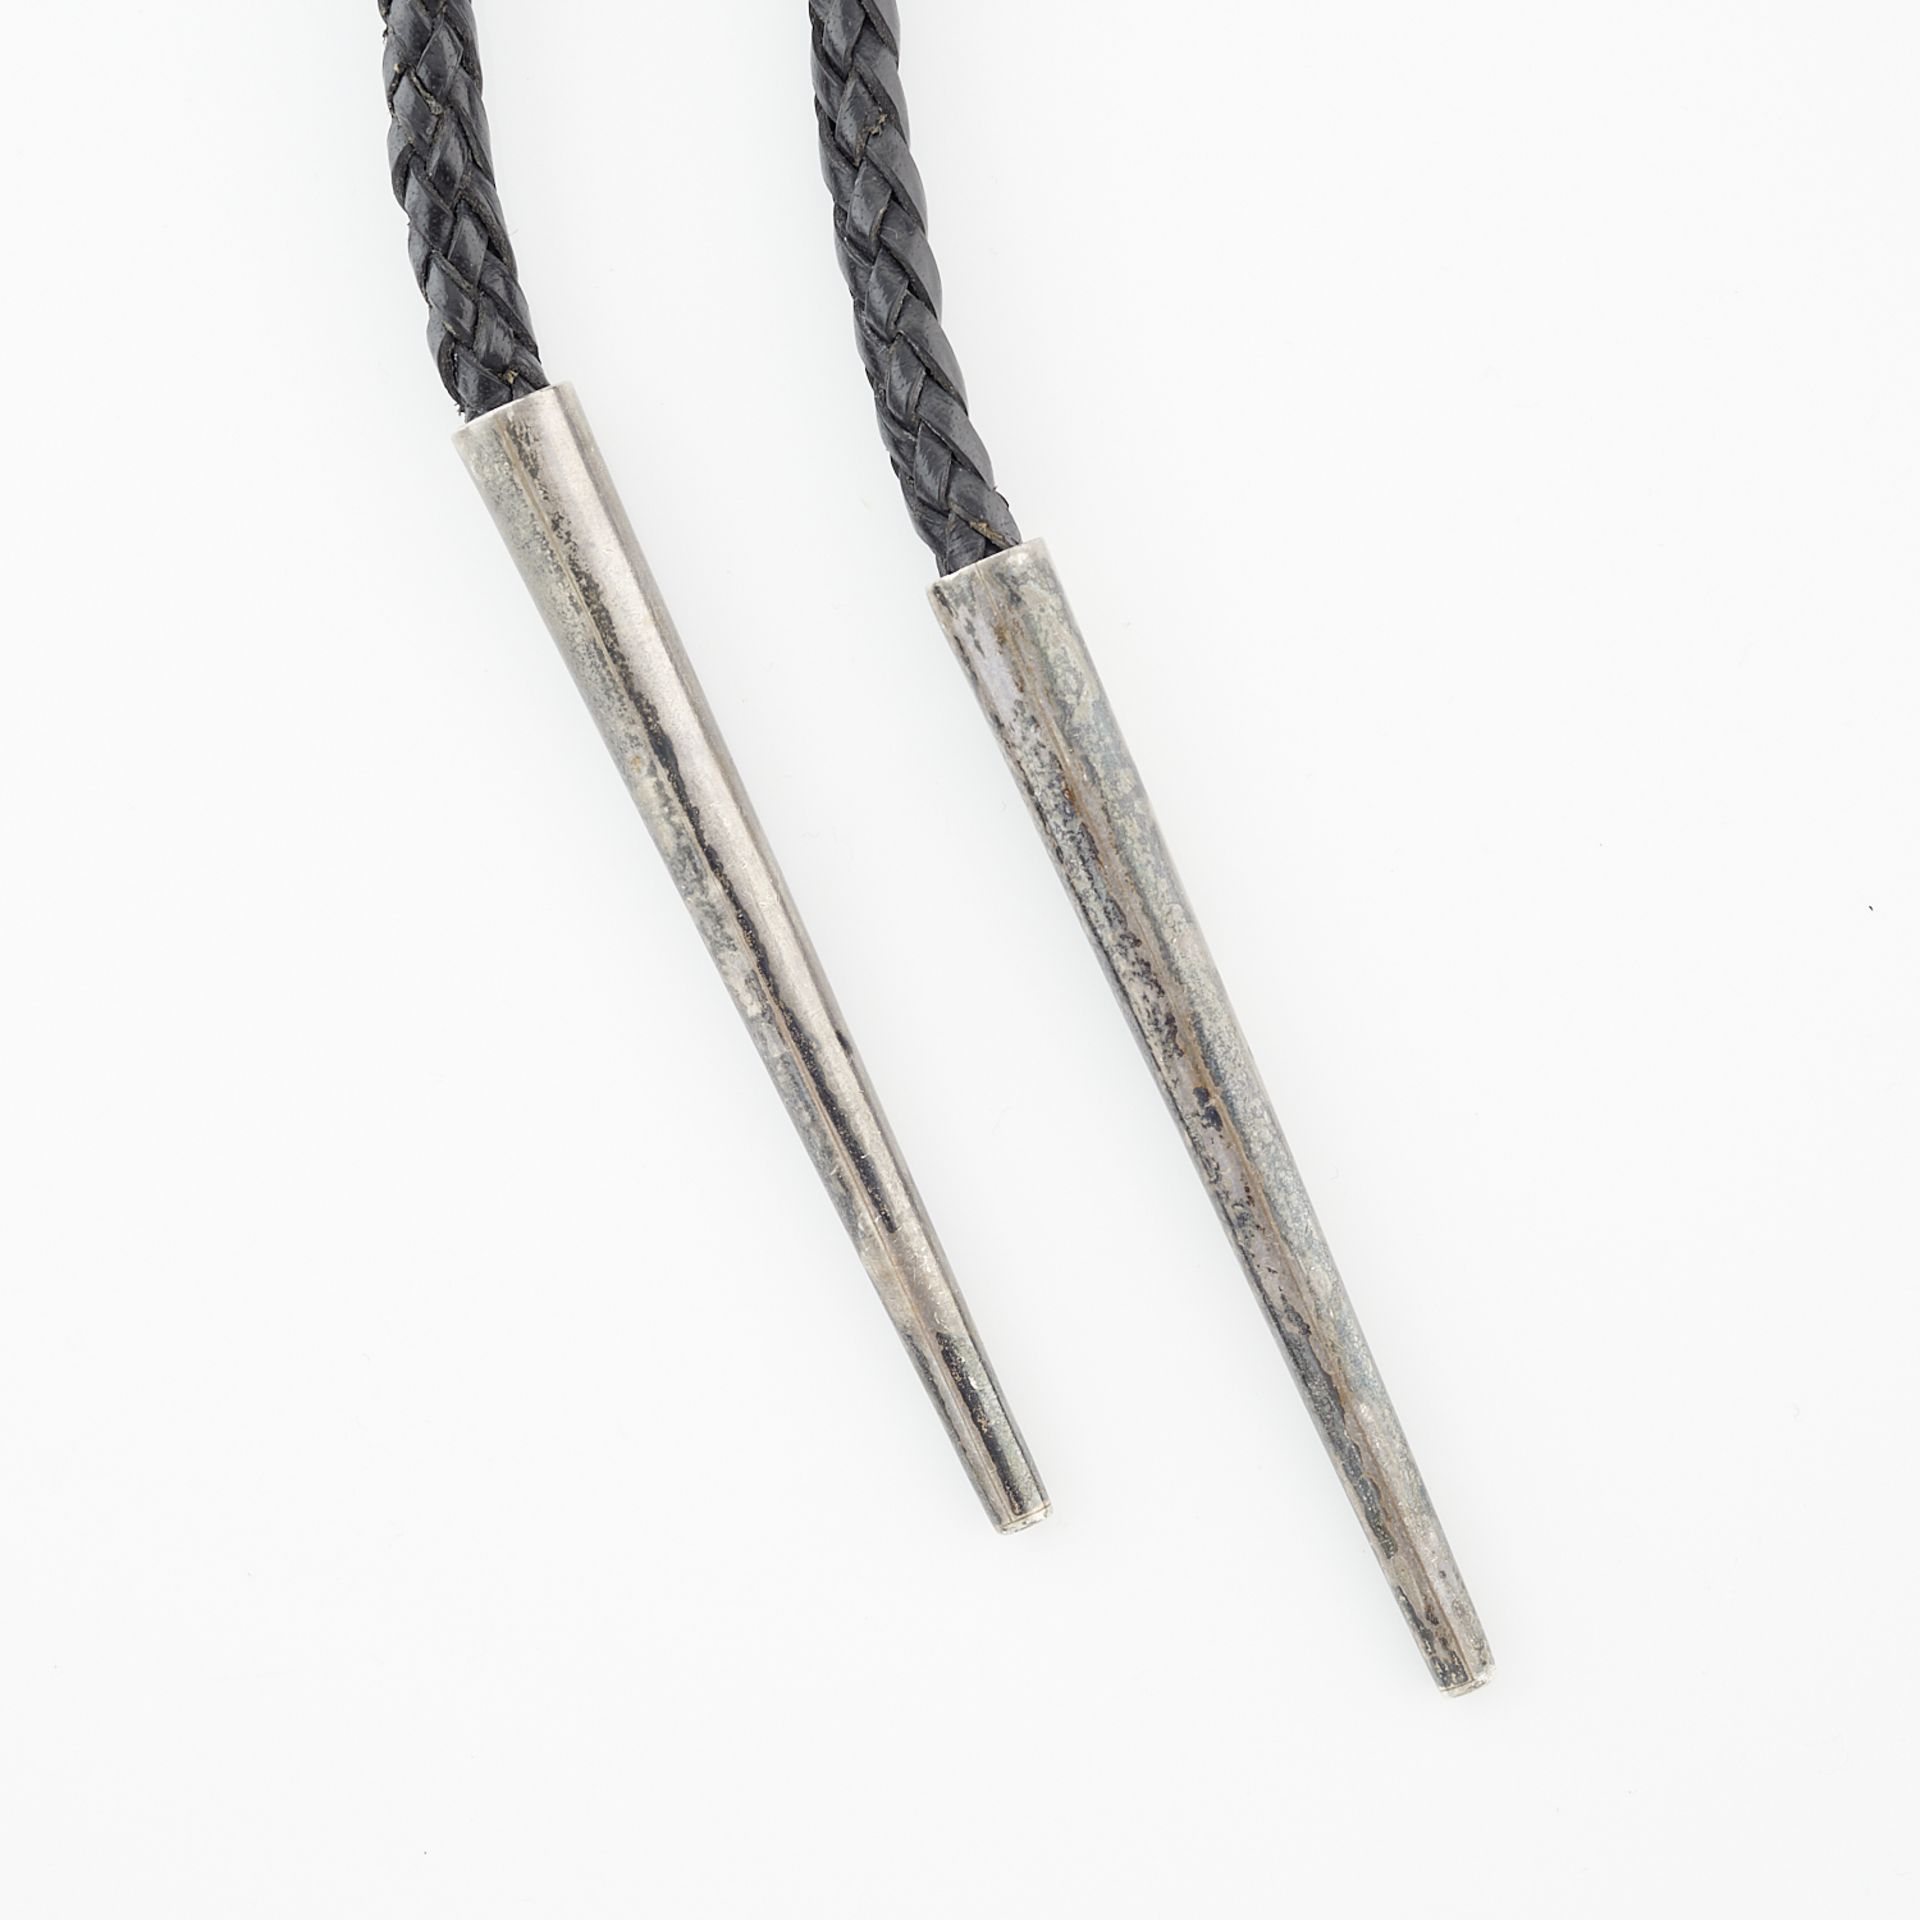 2 Southwest Bolo Ties - Image 7 of 13